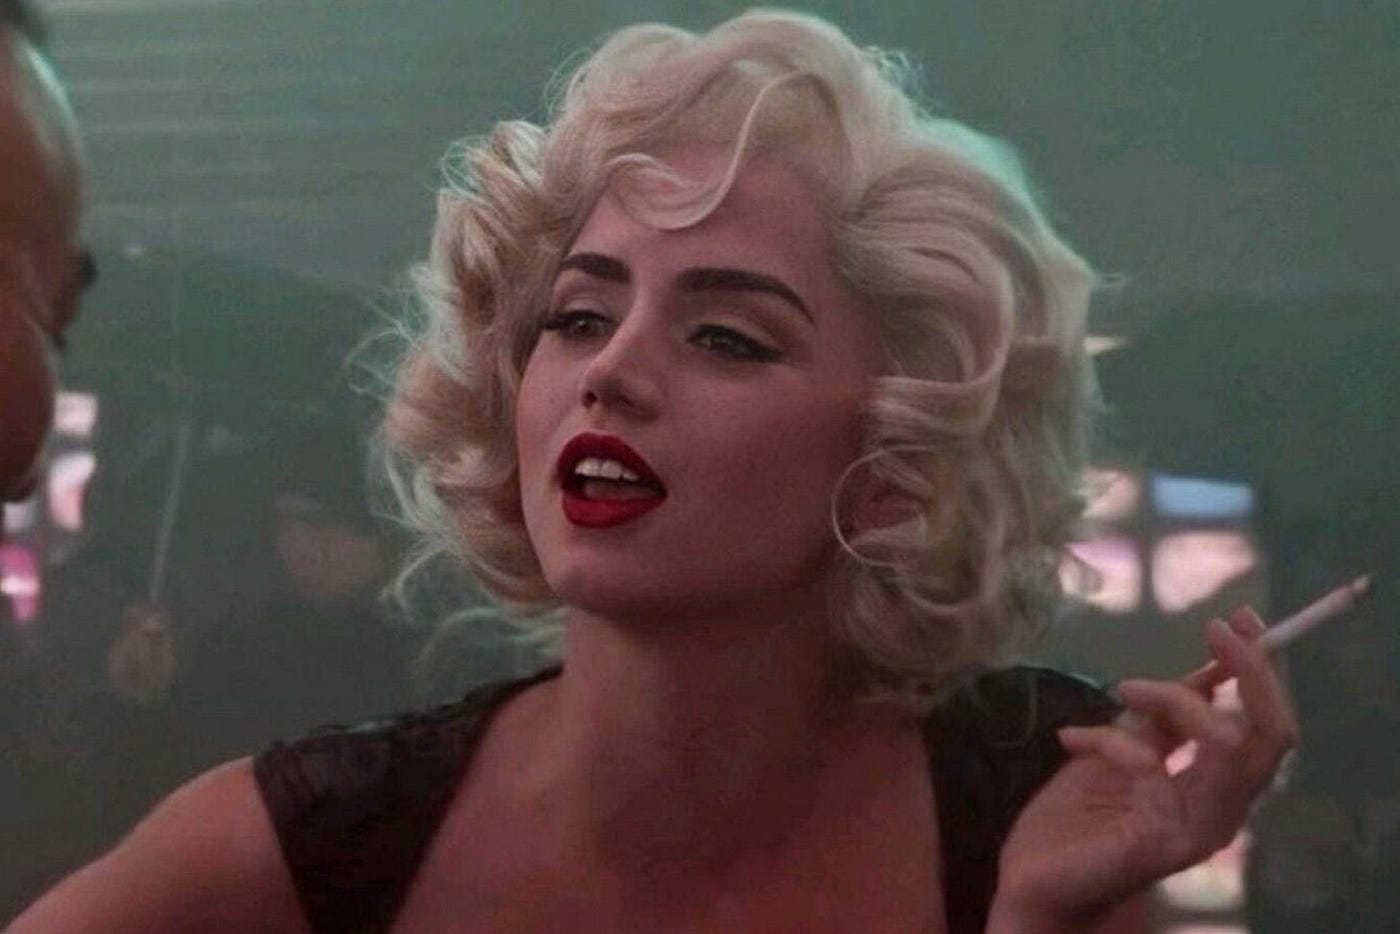 Blonde: All Marilyn Monroe movies are exploitative. But the new Netflix  movie actually shows you inside her vagina